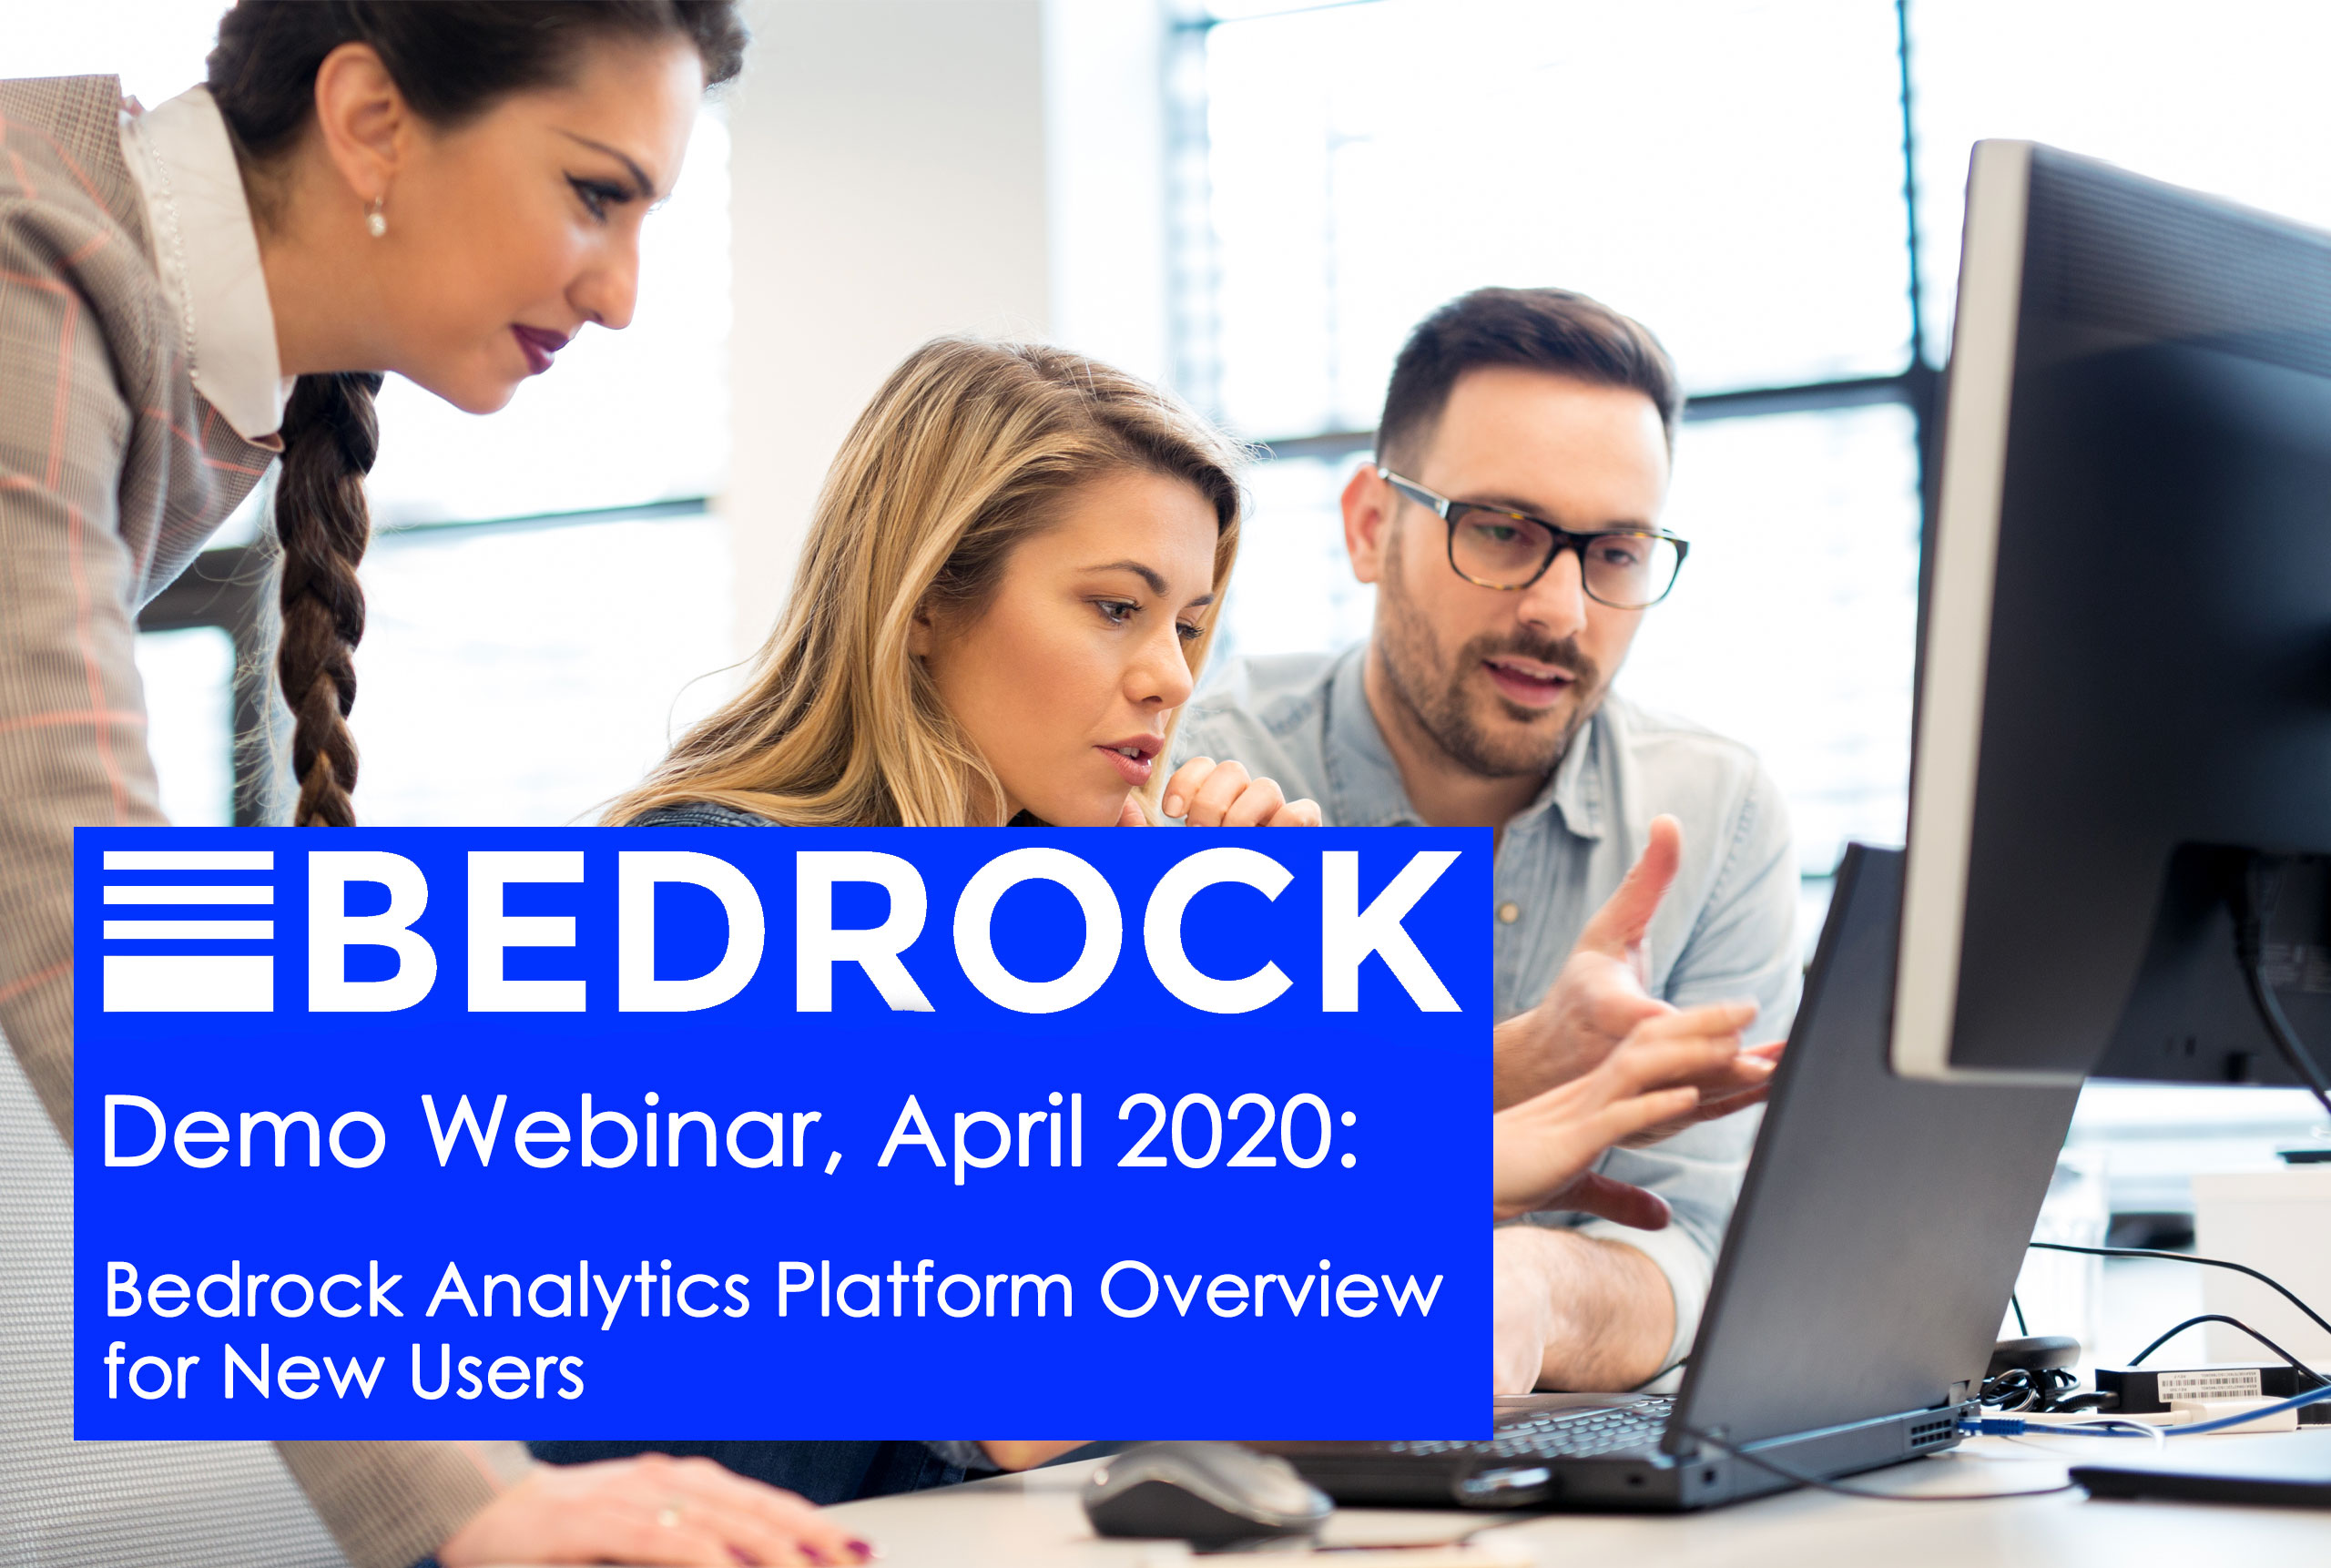 A Bedrock Analytics Webinar: Join CEO Will Salcido for this guided tour of the Bedrock platform's basic functionalities & some key examples of the software's powerful visualizations.